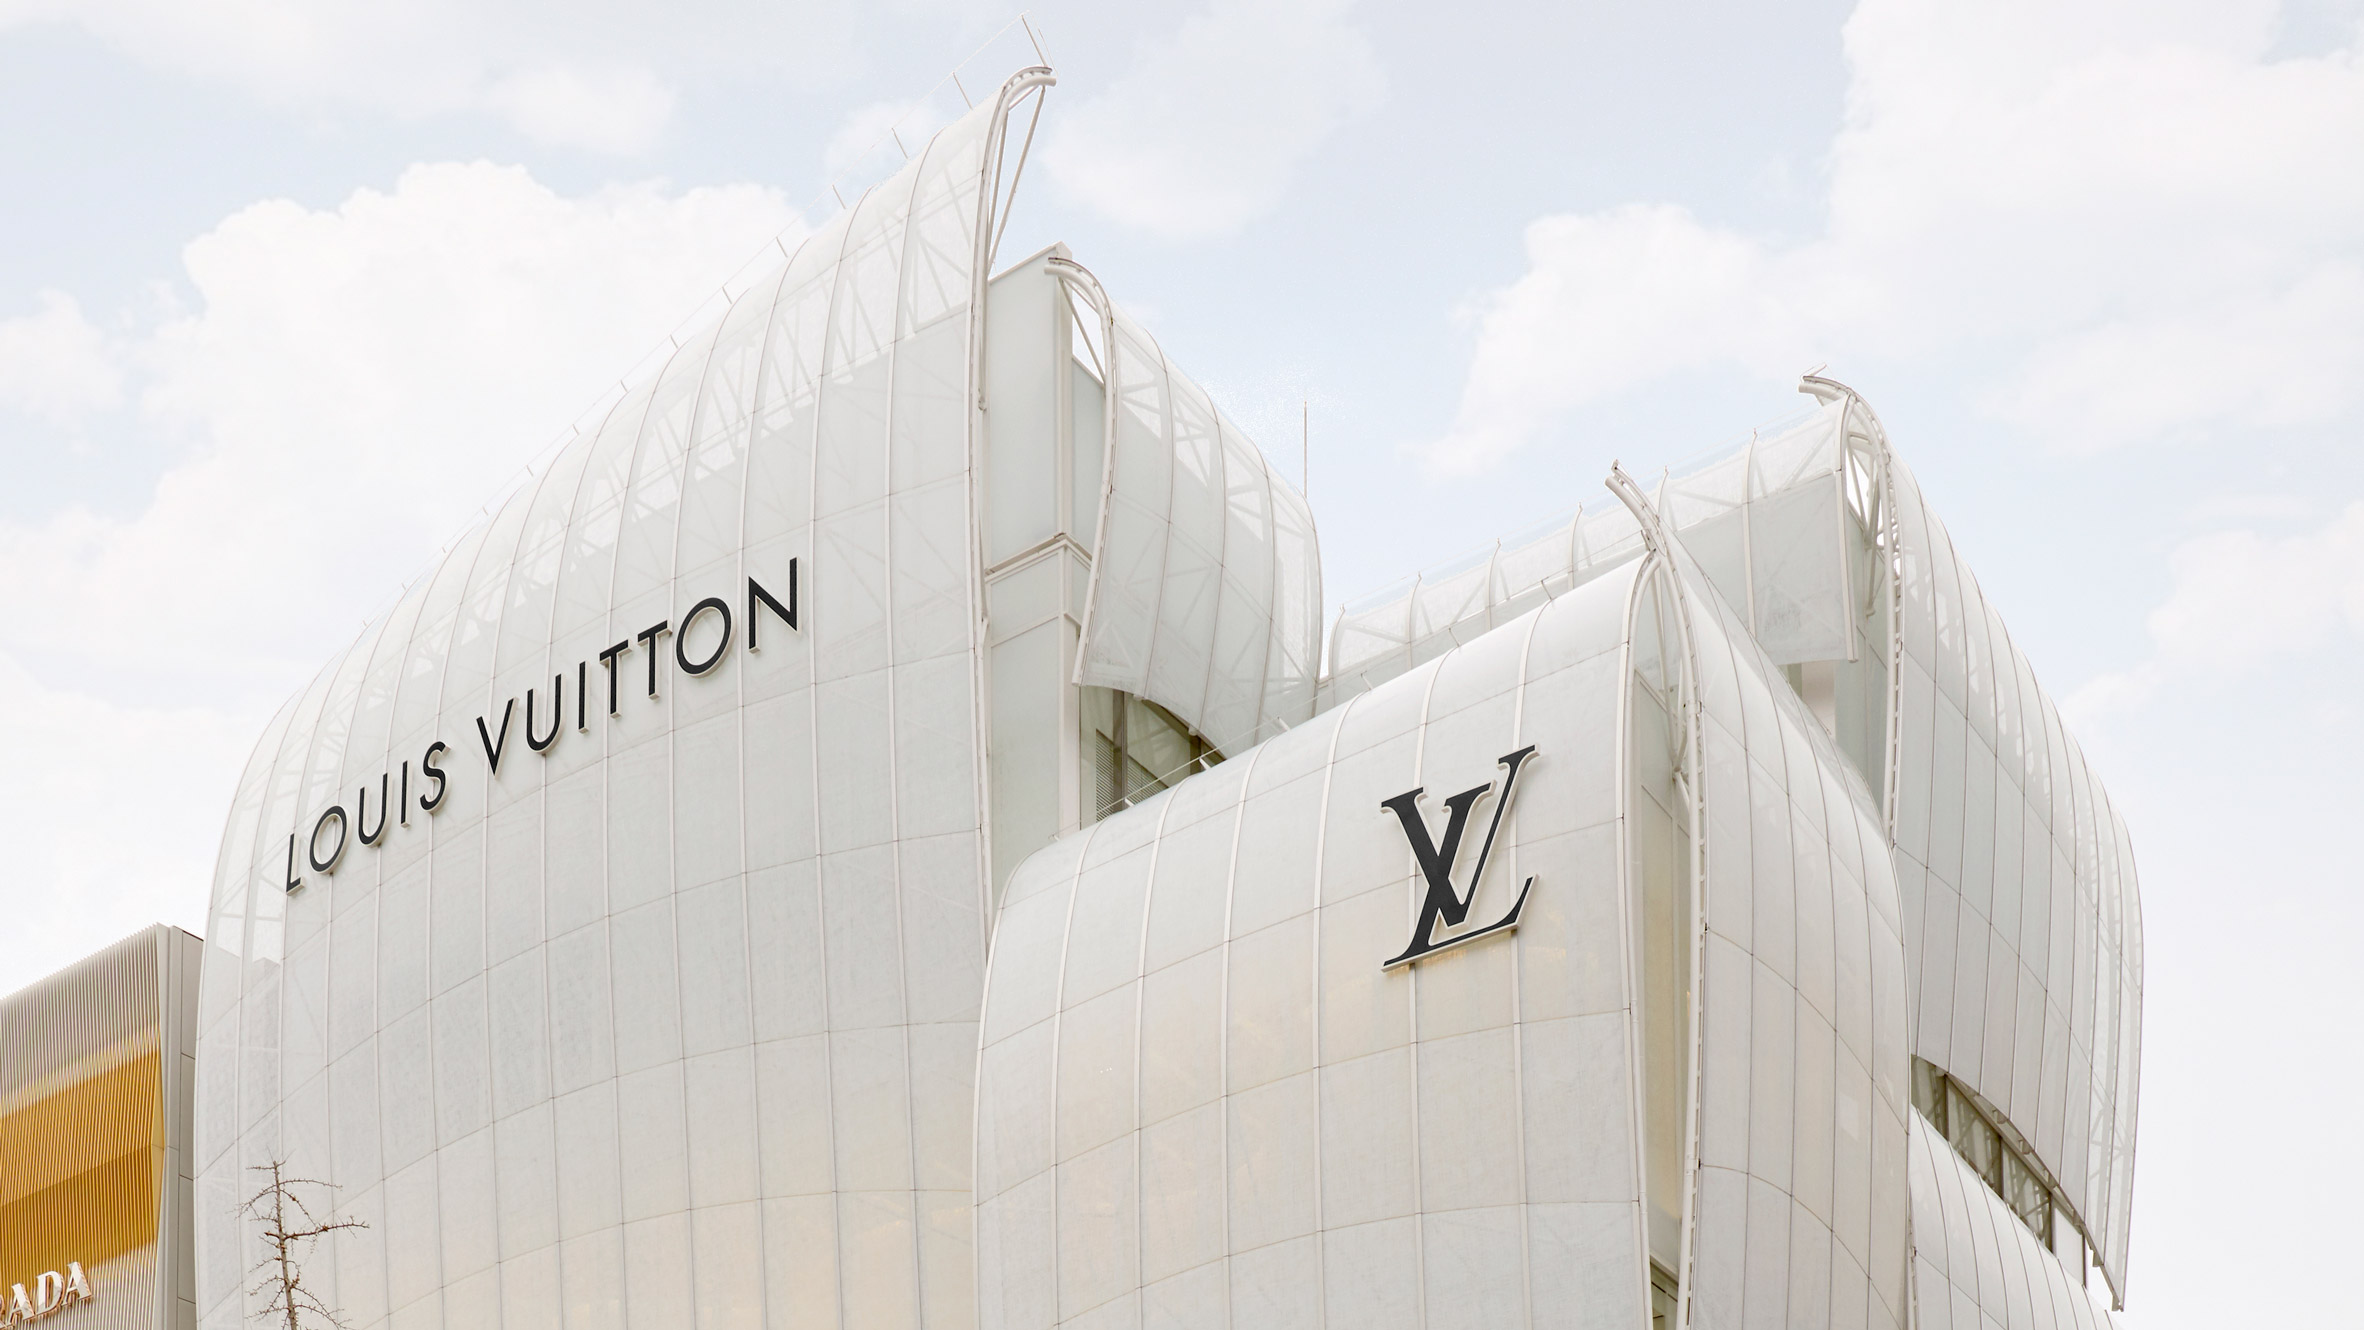 Louis Vuitton's flagship Osaka store covered in curving glass sails